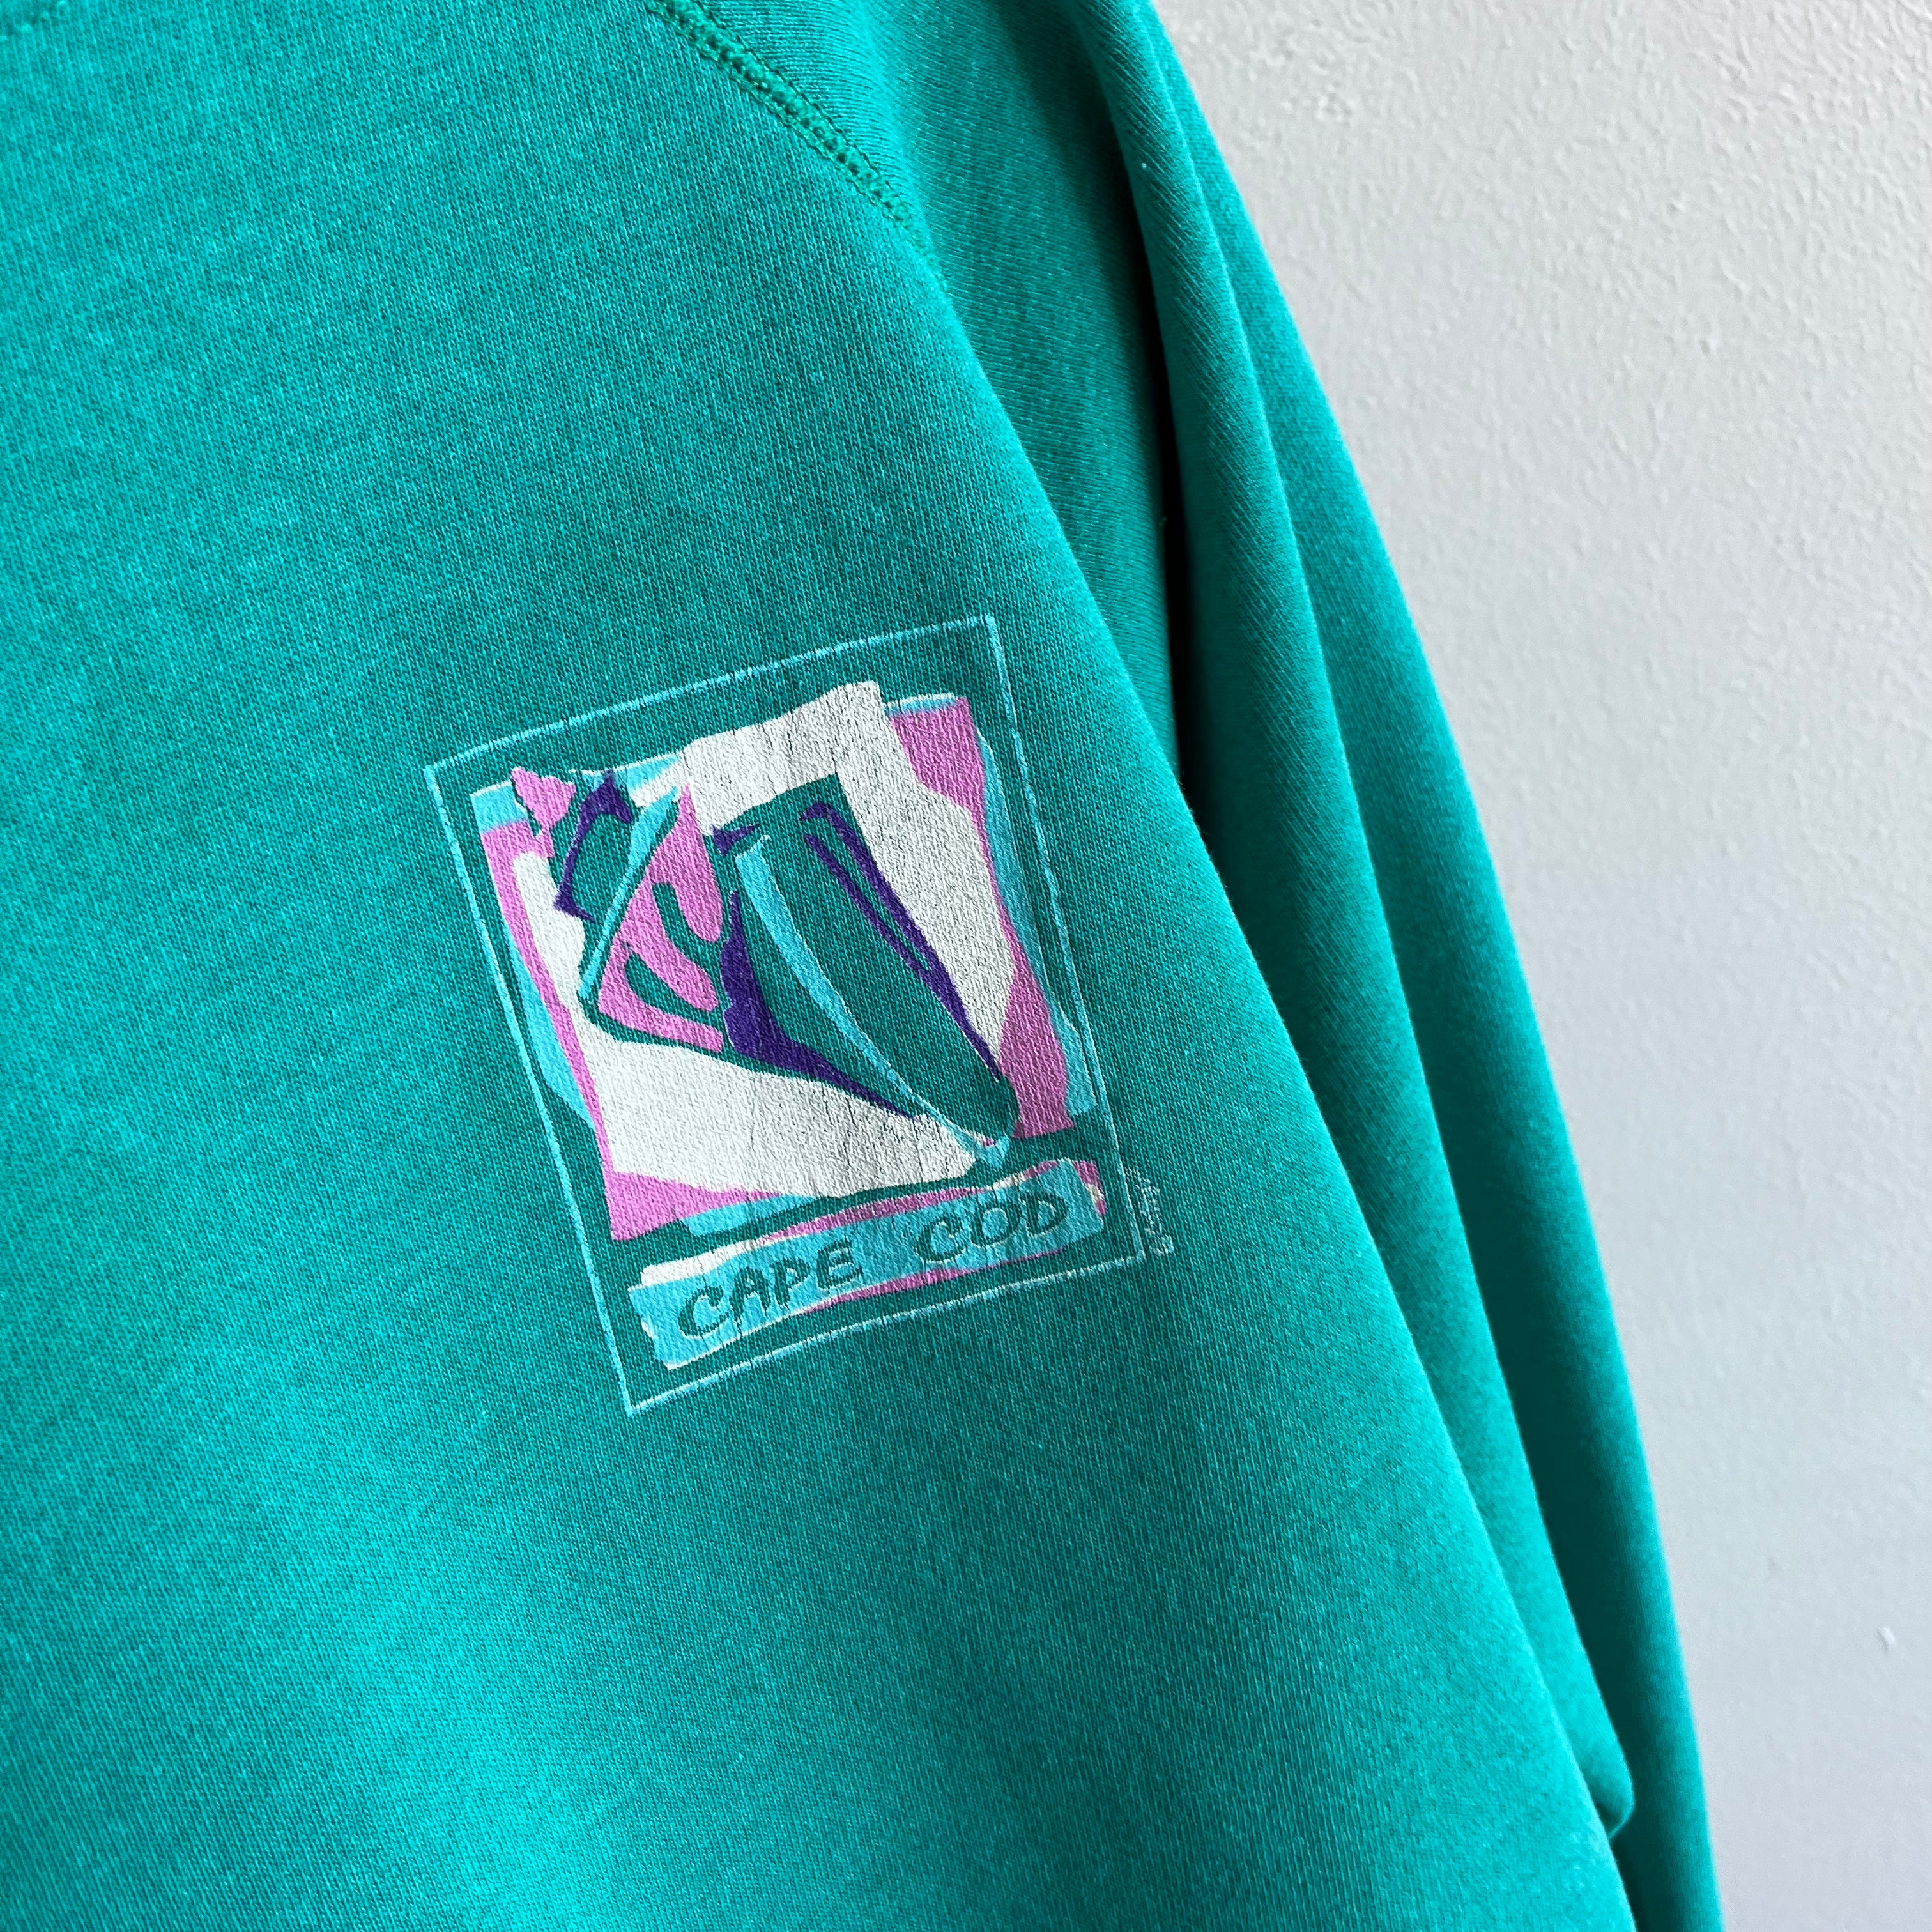 1980s Cape Cod Sweatshirt with Staining